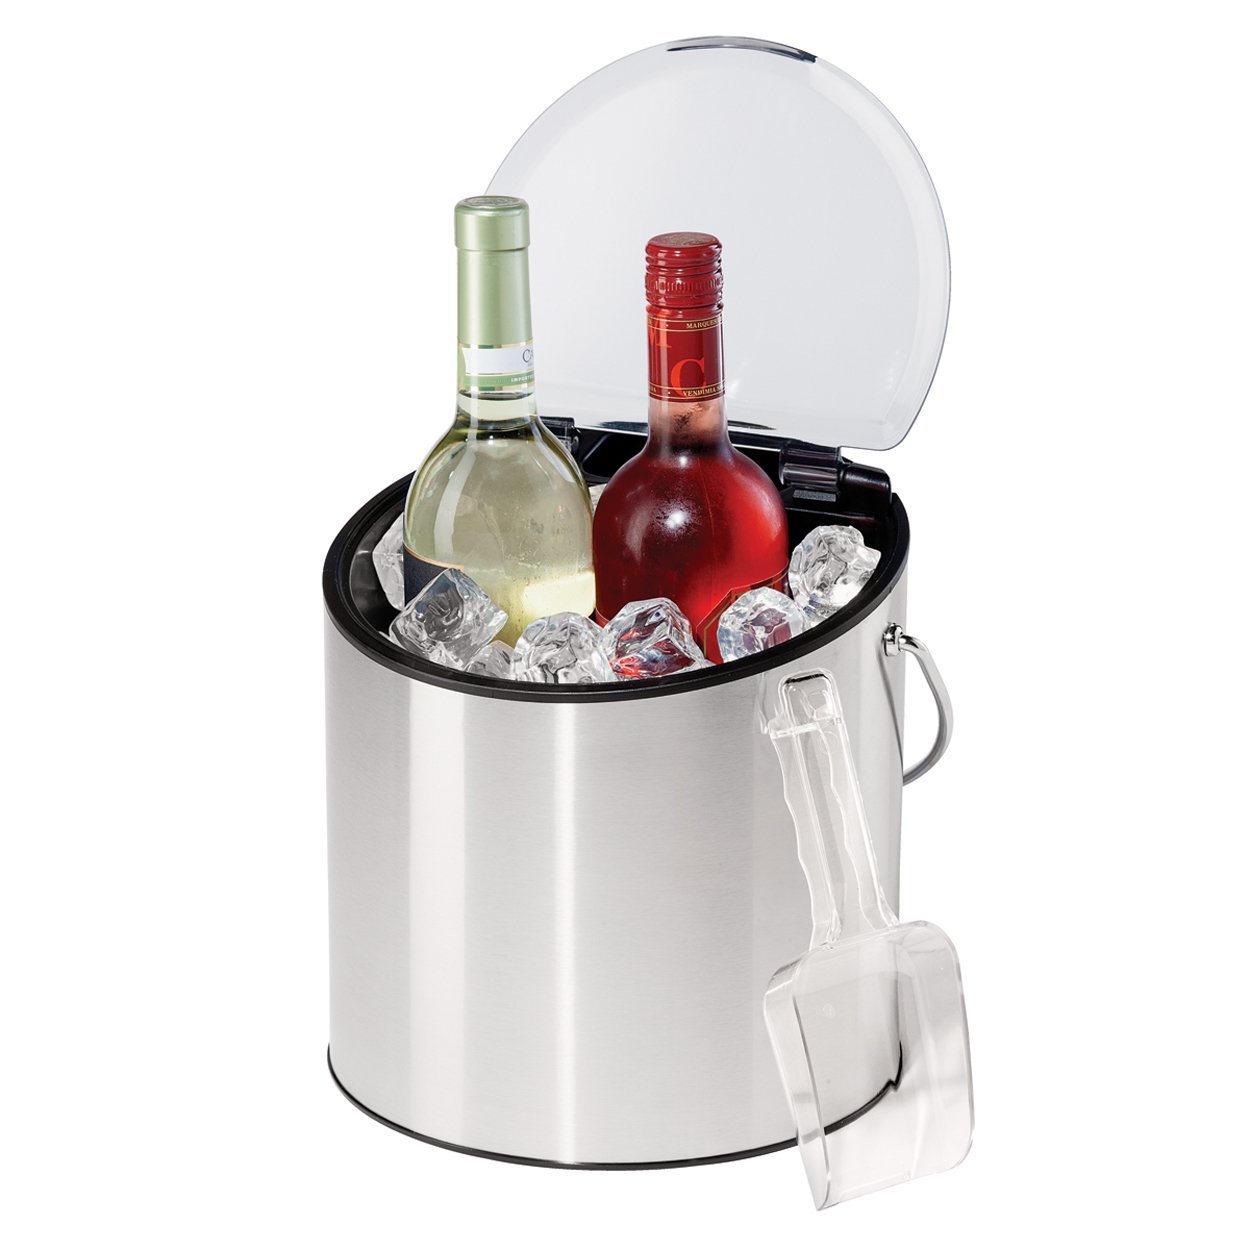 OGGI Wine & Ice Bucket- Ice Bucket with Lid & Ice Scoop, Wine Chiller Bucket, Tabletop Wine Chiller Holds 2 Bottles, Bar Set is Great Addition to Bar Cart or Home Bar Accessories, 4-Quart